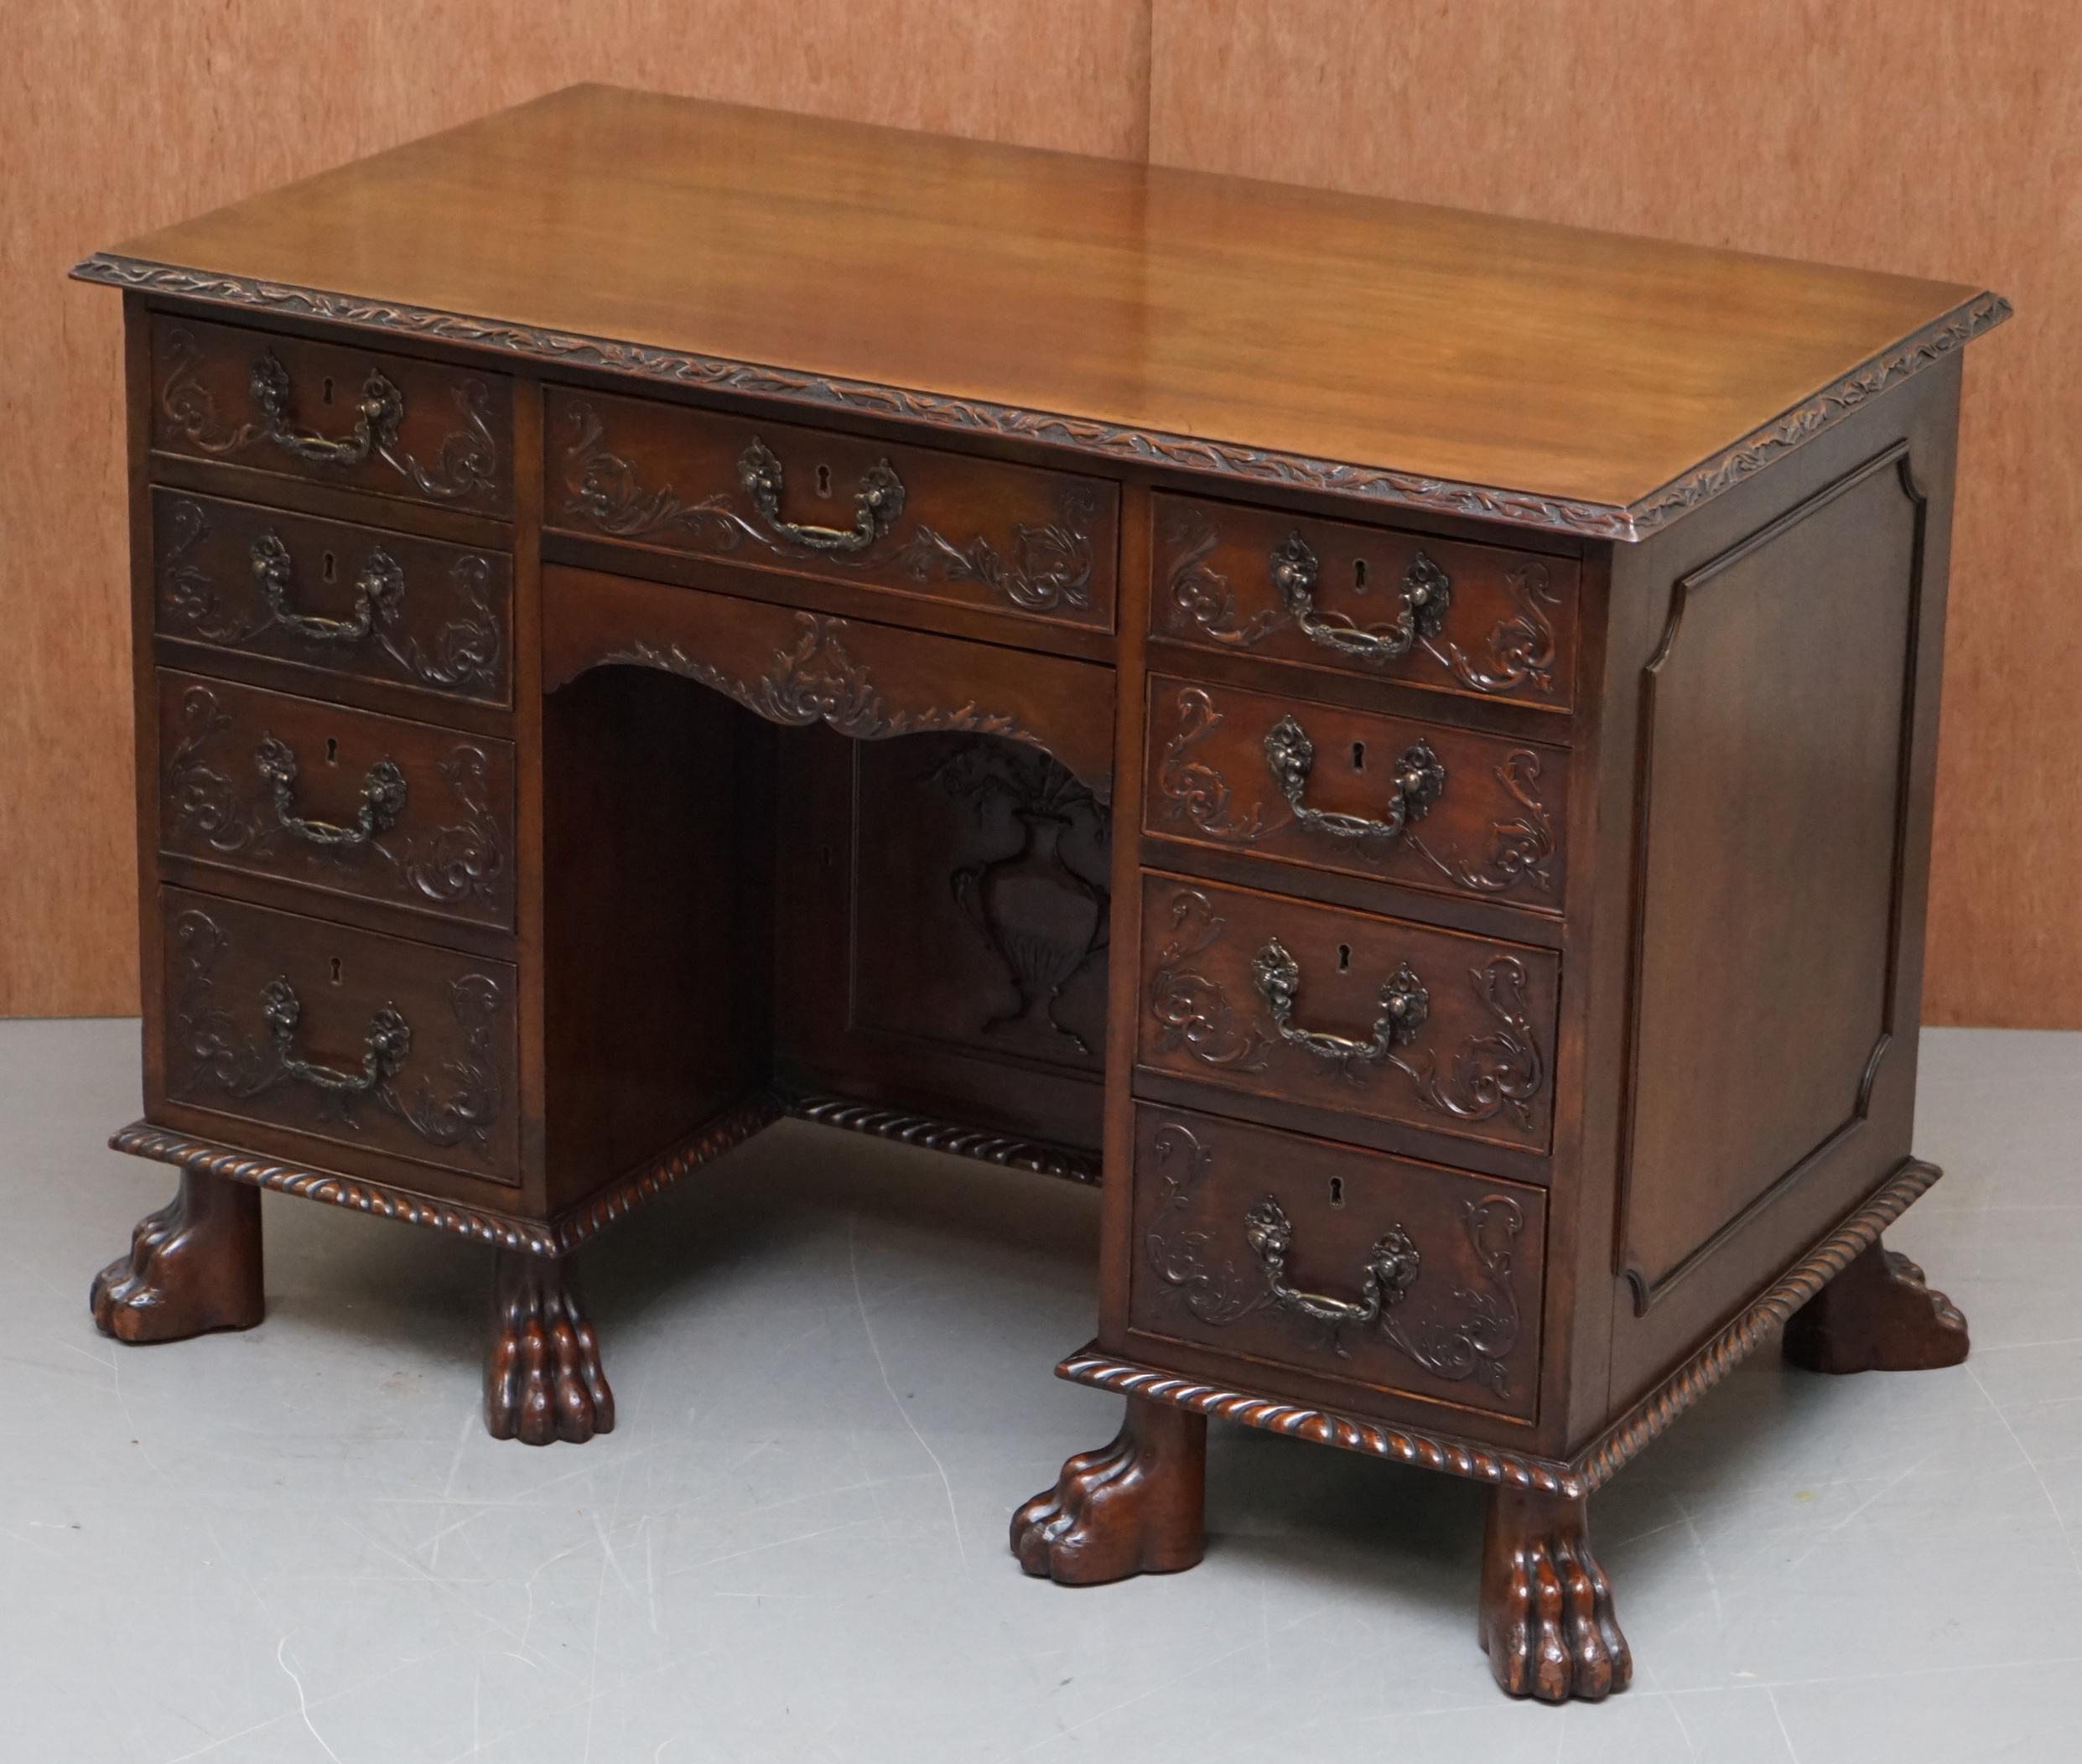 Early Victorian Sublime Hand Carved from Top to Bottom Antique Victorian 1850 Knee Hole Desk For Sale